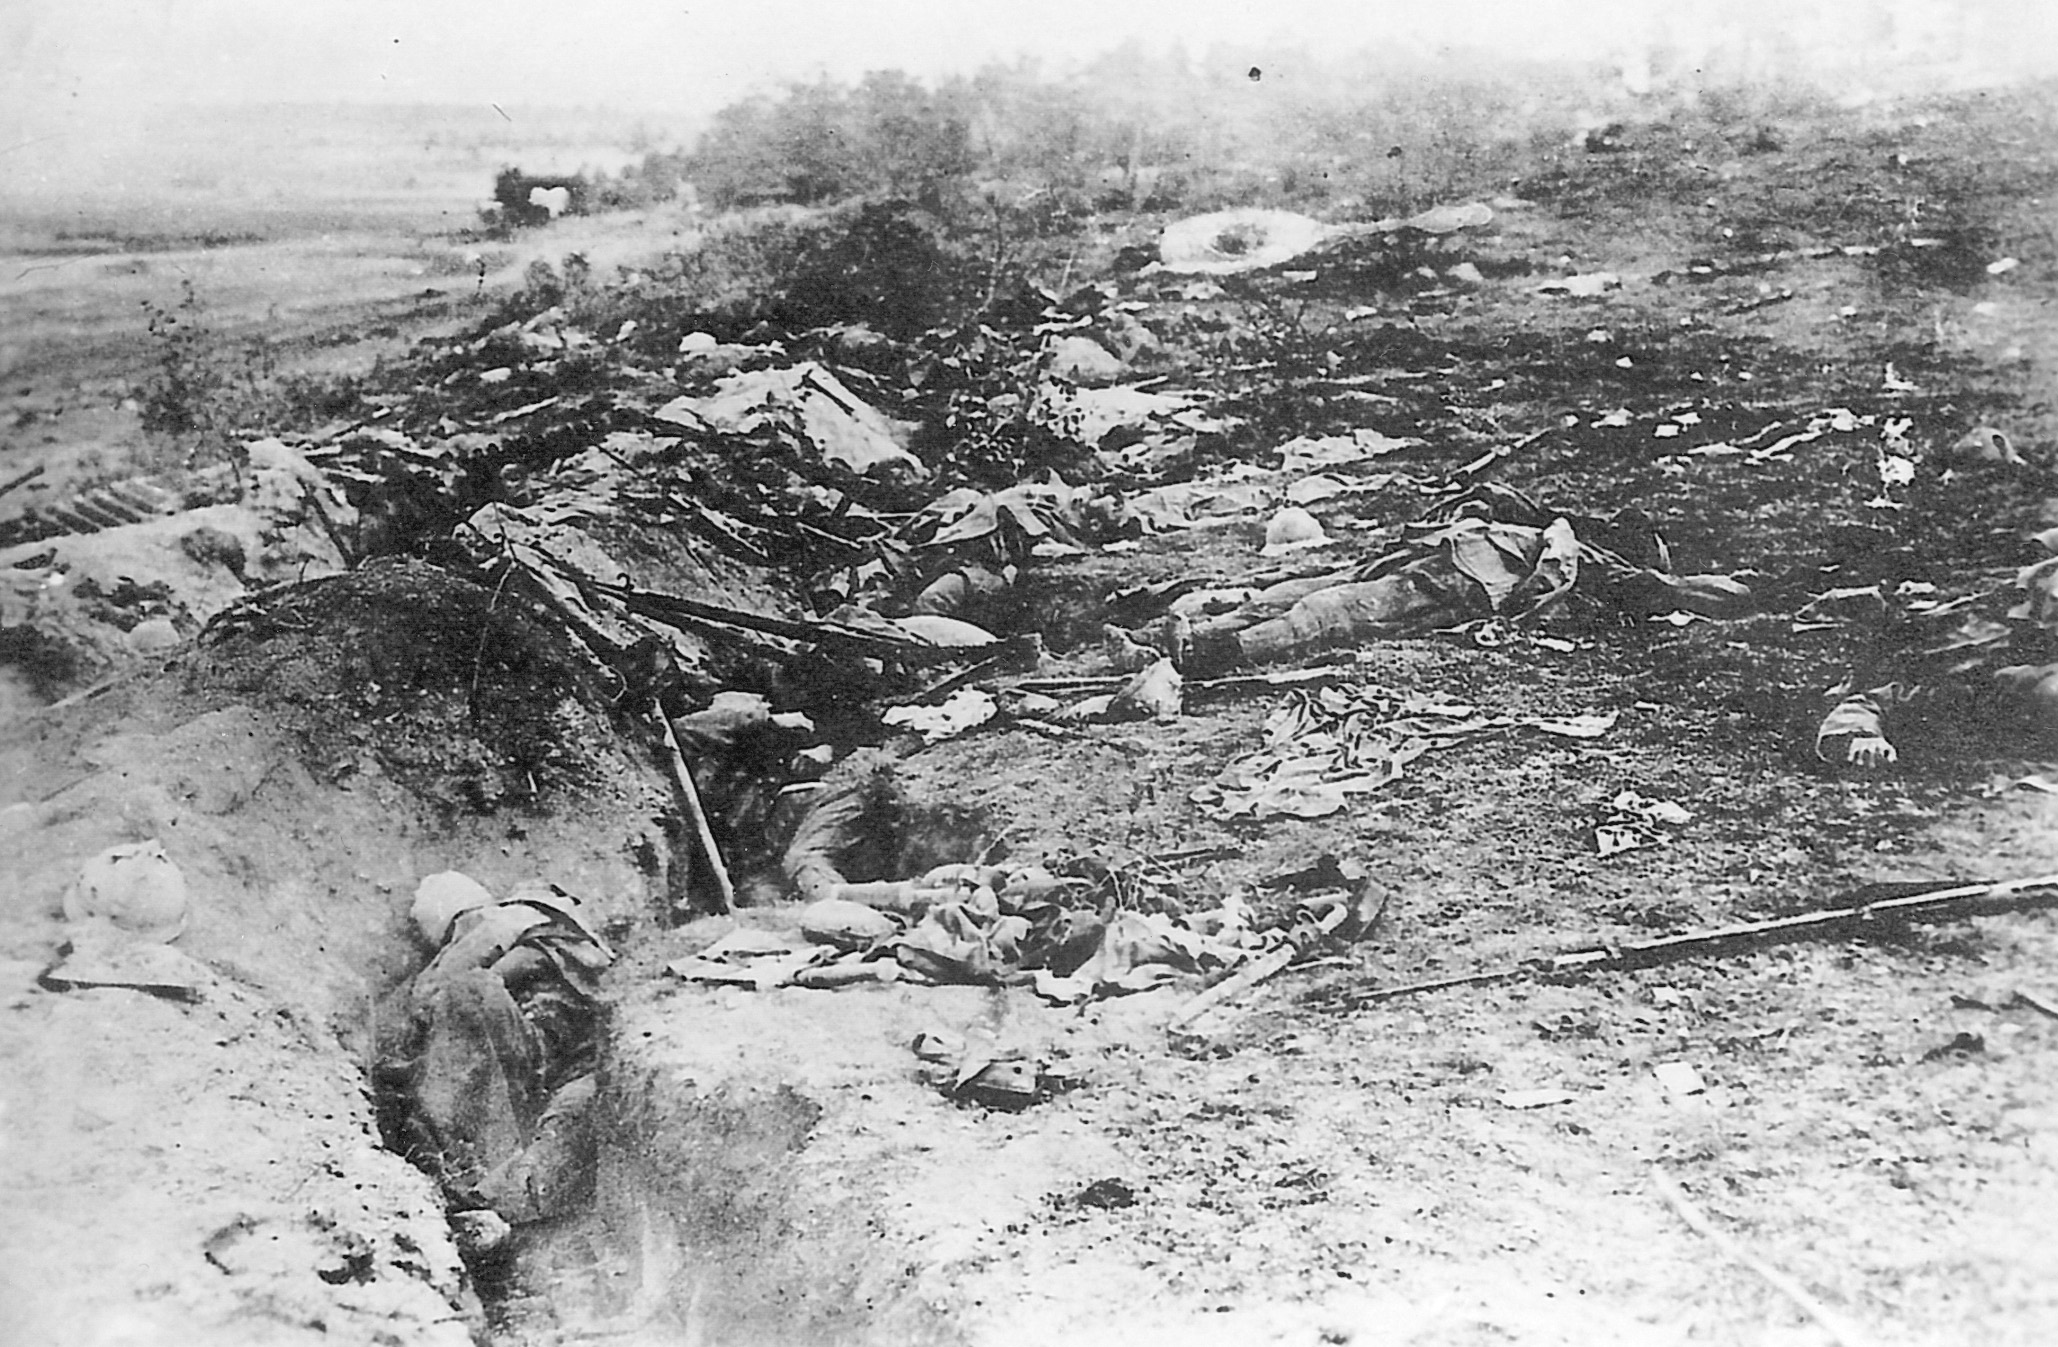 The remains of Frenchmen who died defending their trench line are strewn on the battlefield.